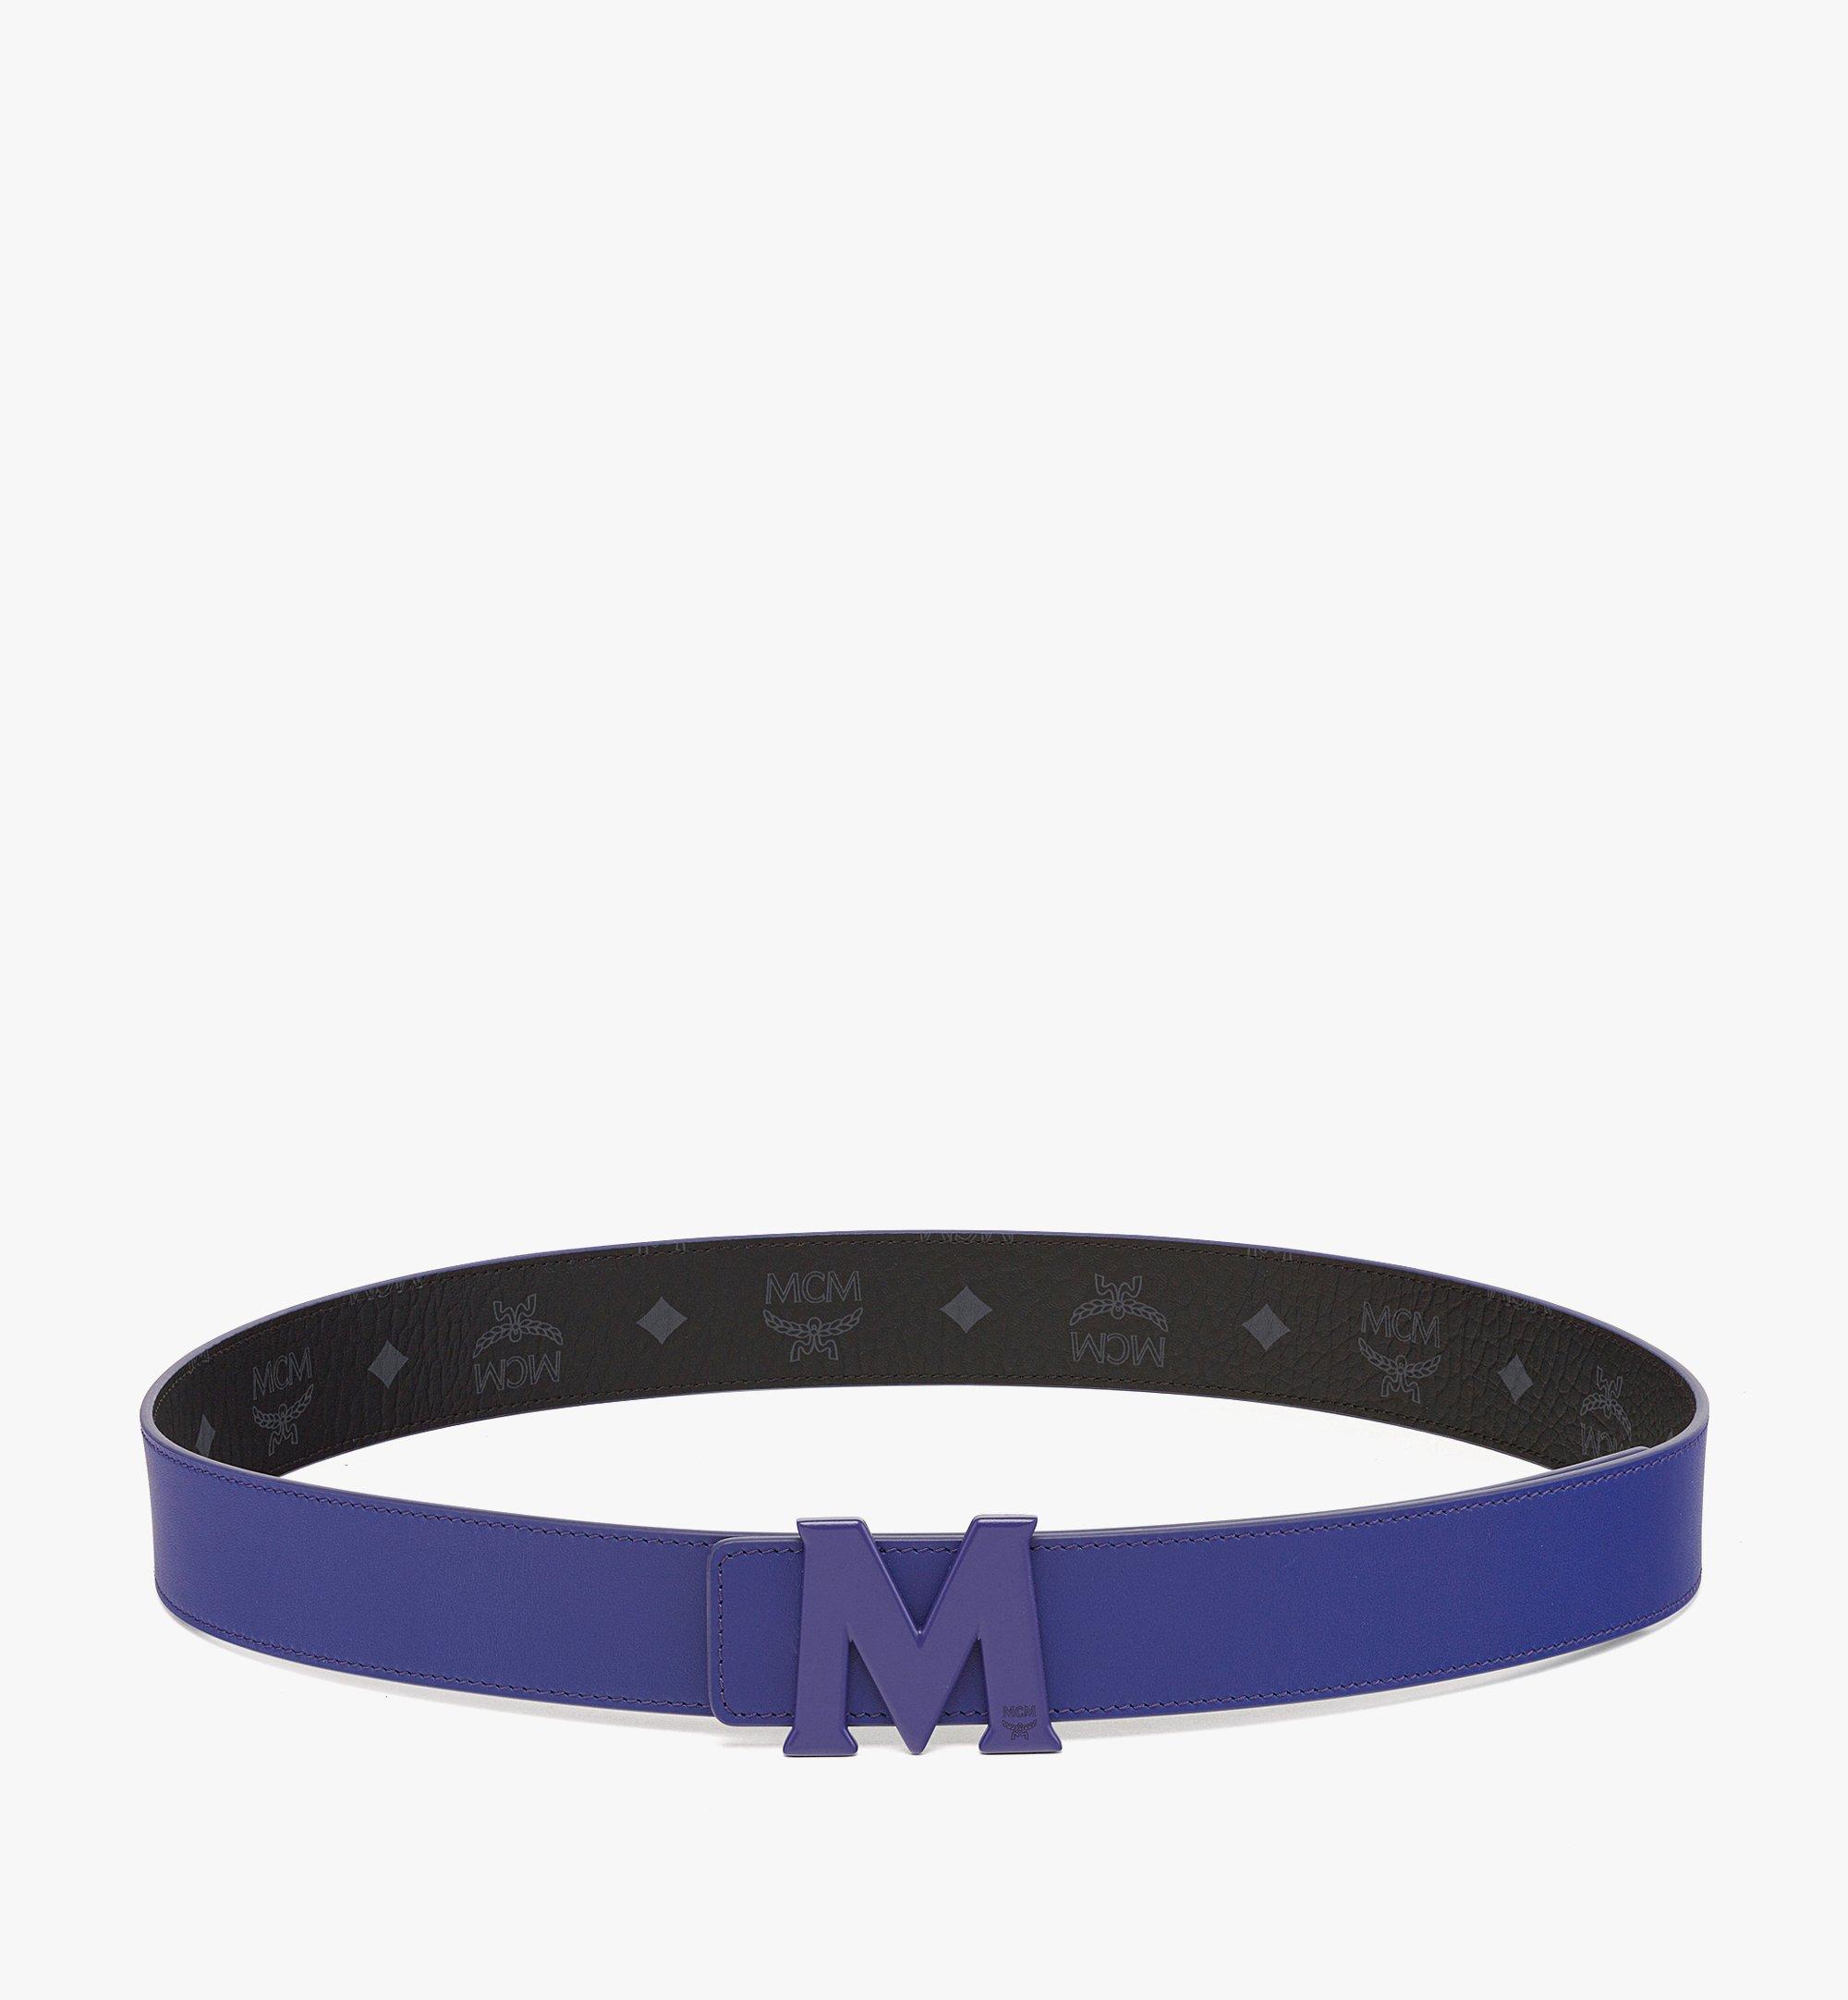 Mcm - Authenticated Belt - Leather Blue Plain for Women, Very Good Condition